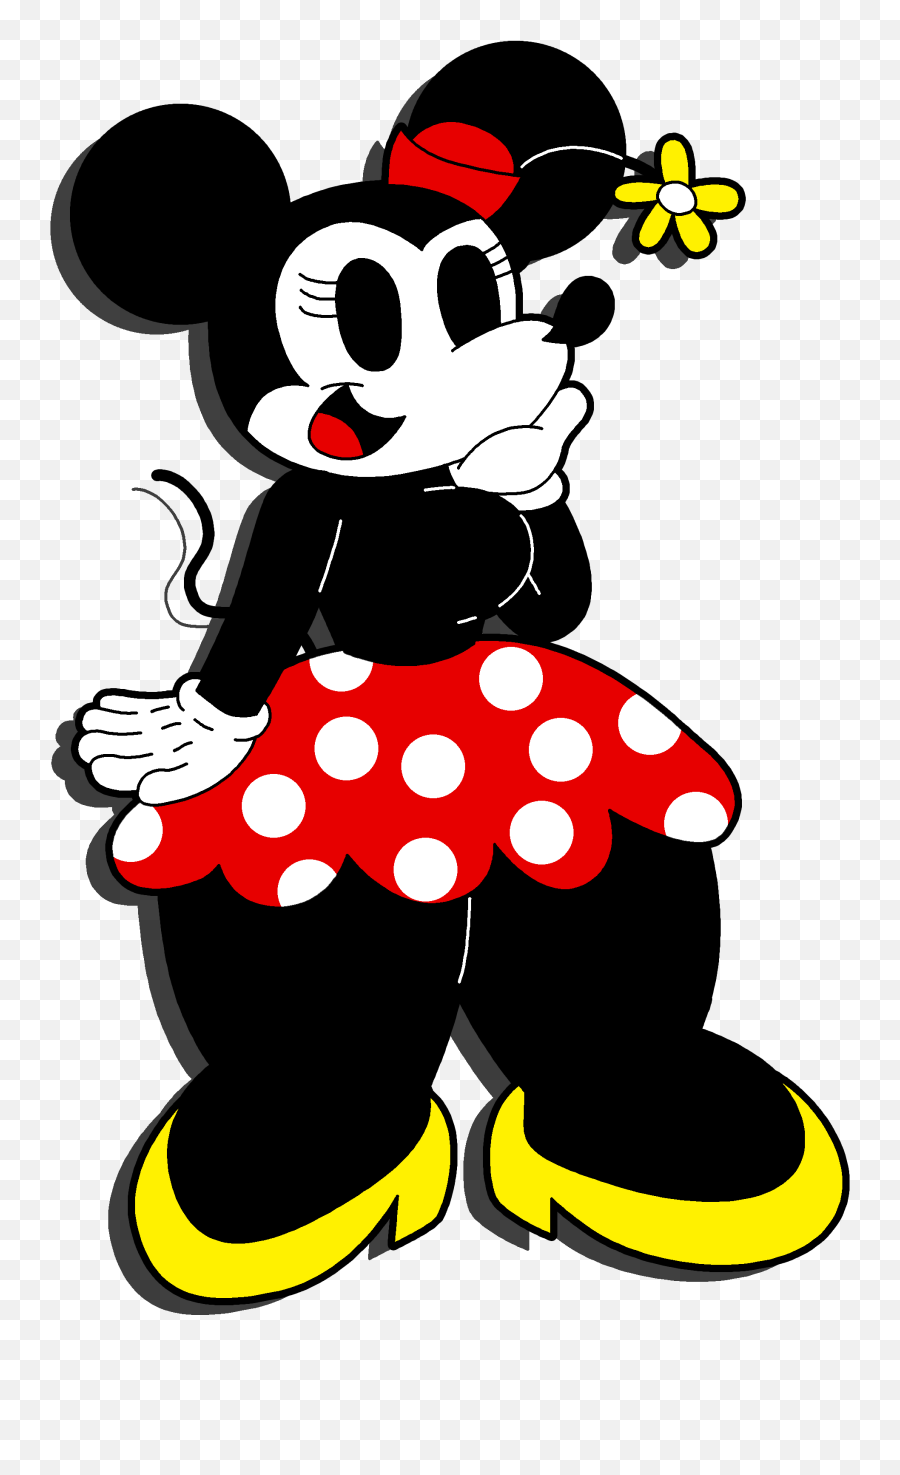 Minnie Mouse Clipart - Minnie Mouse 3 Minnie Mouse 3 Emoji,Minnie Mouse Clipart Black And White